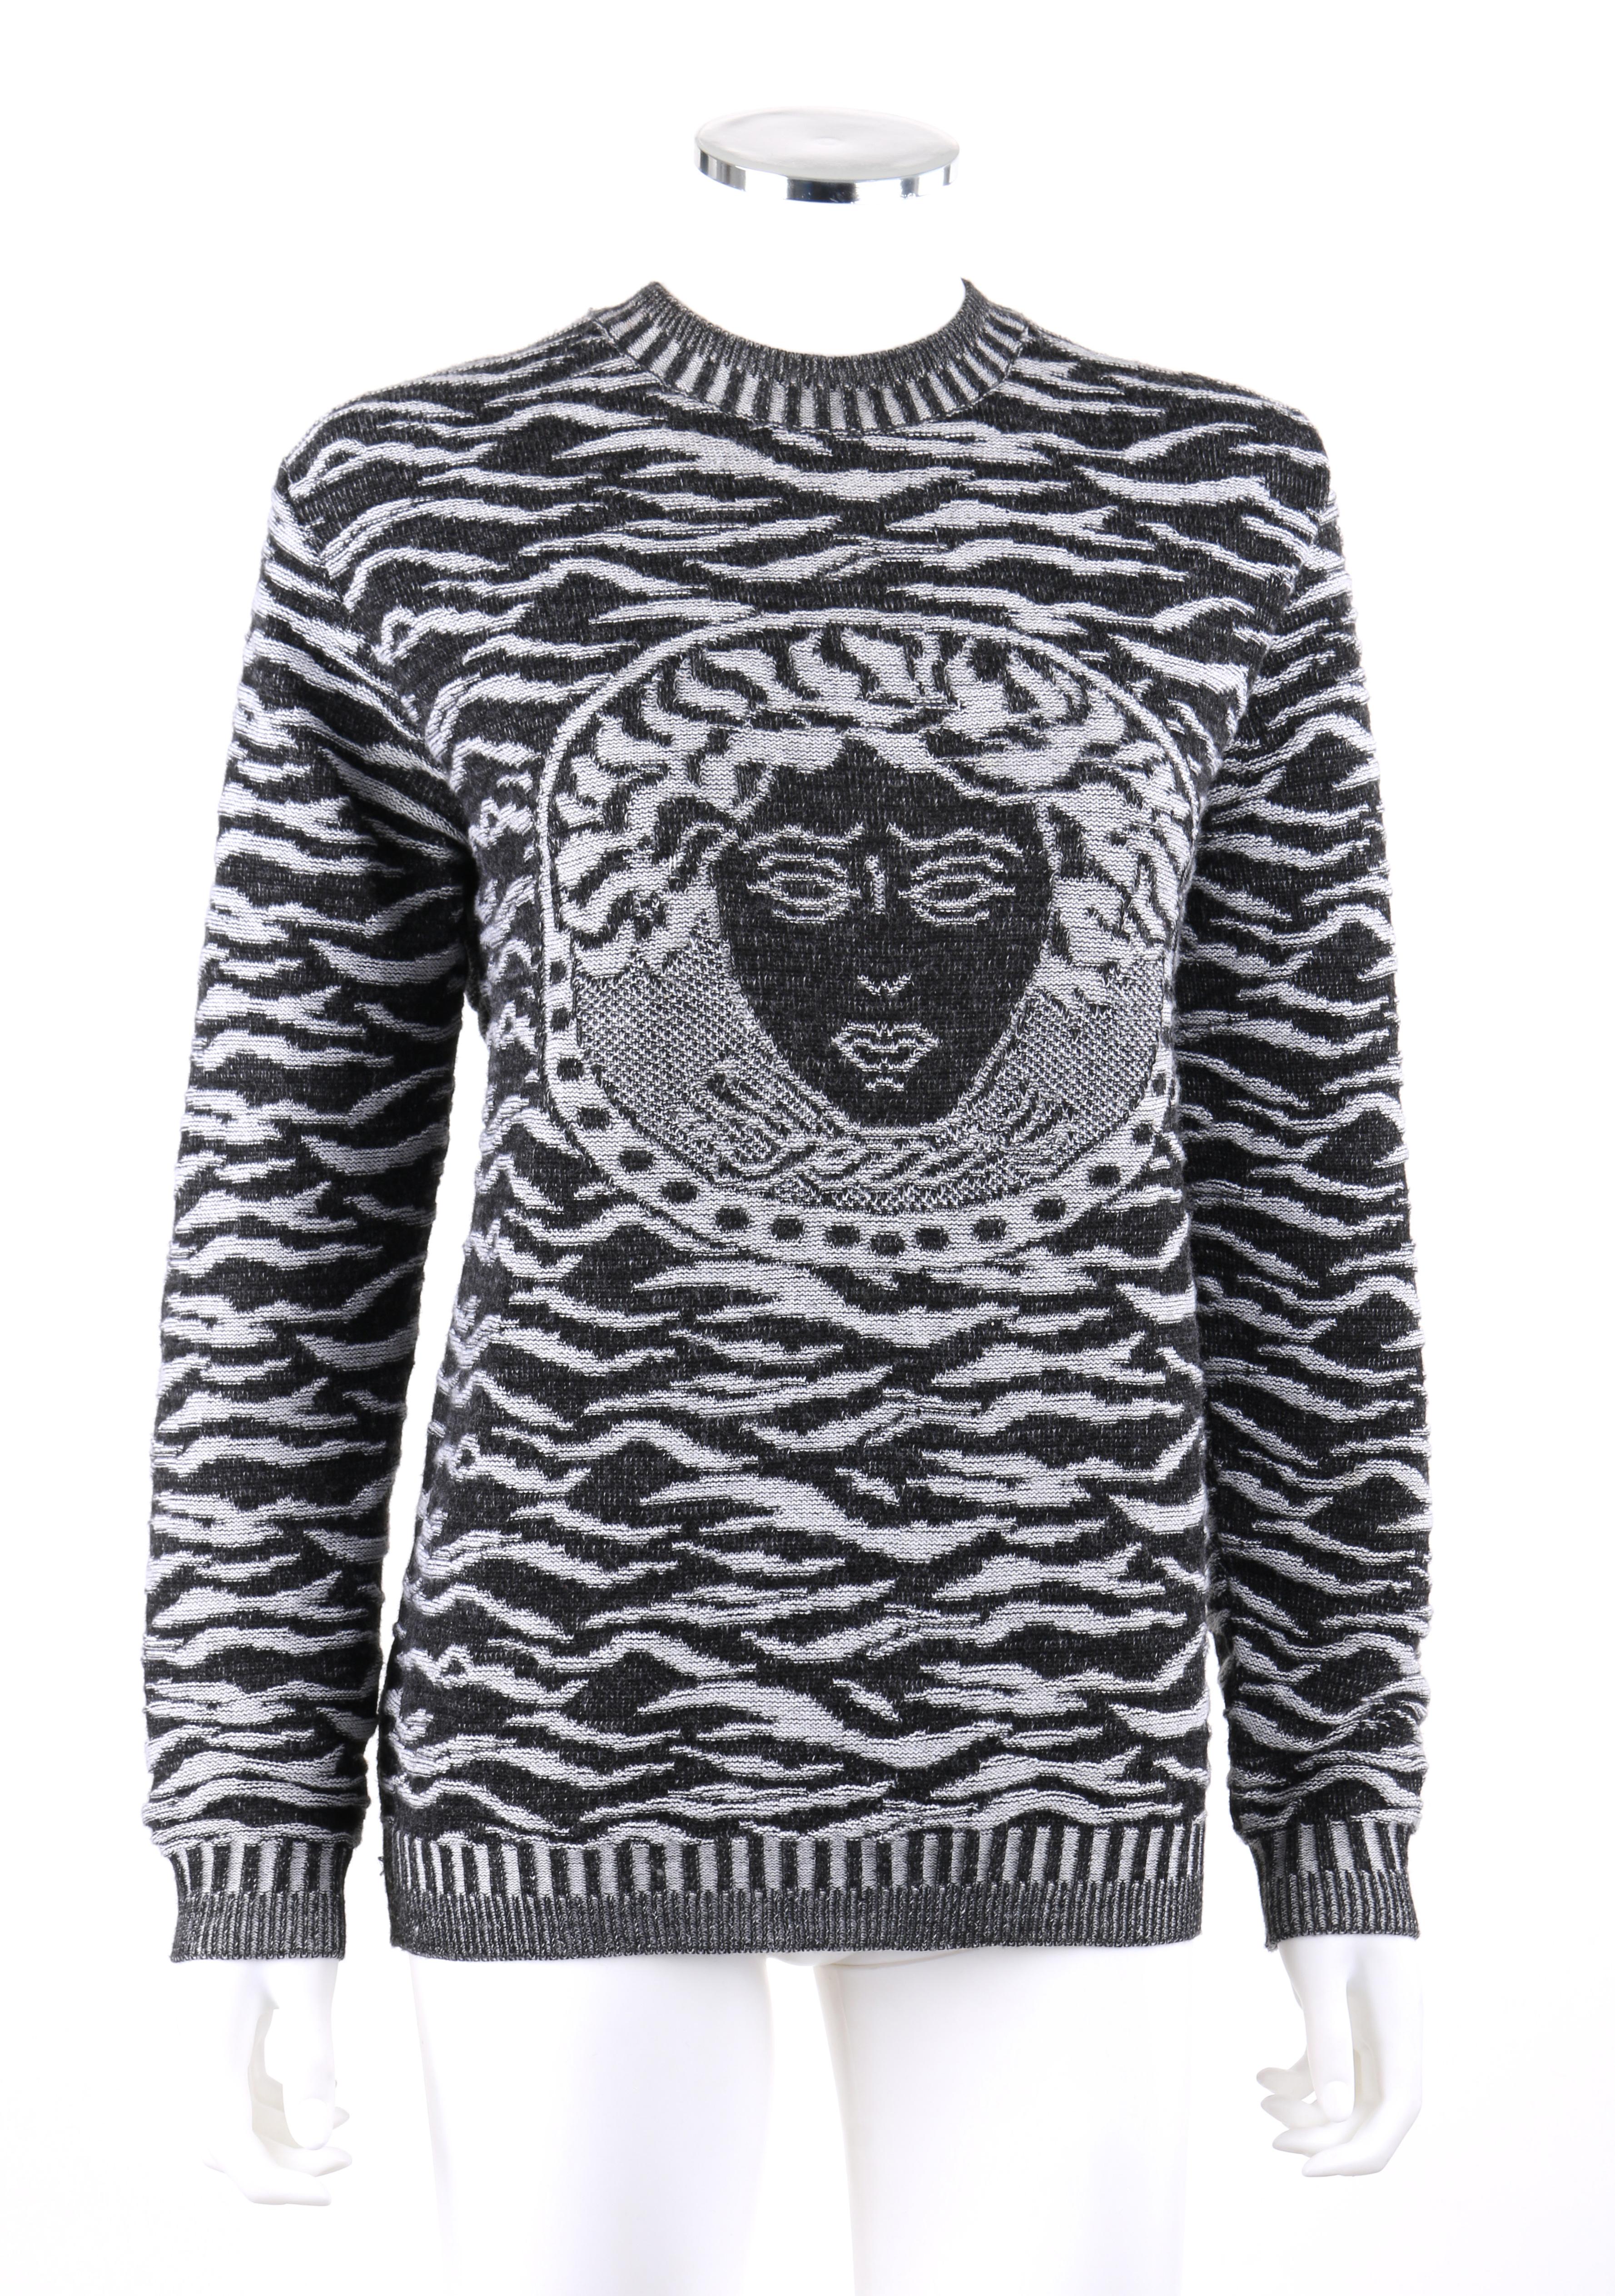 VERSACE Jeans Couture Black White Zebra Print Medusa Face Wool Crew Neck Sweater 
 
Brand / Manufacturer: Versace 
Style: Sweater
Color(s): Shades of black, grey and white. 
Lined: No      
Marked Fabric Content: 50% Acrylic, 50% Wool. 
Additional